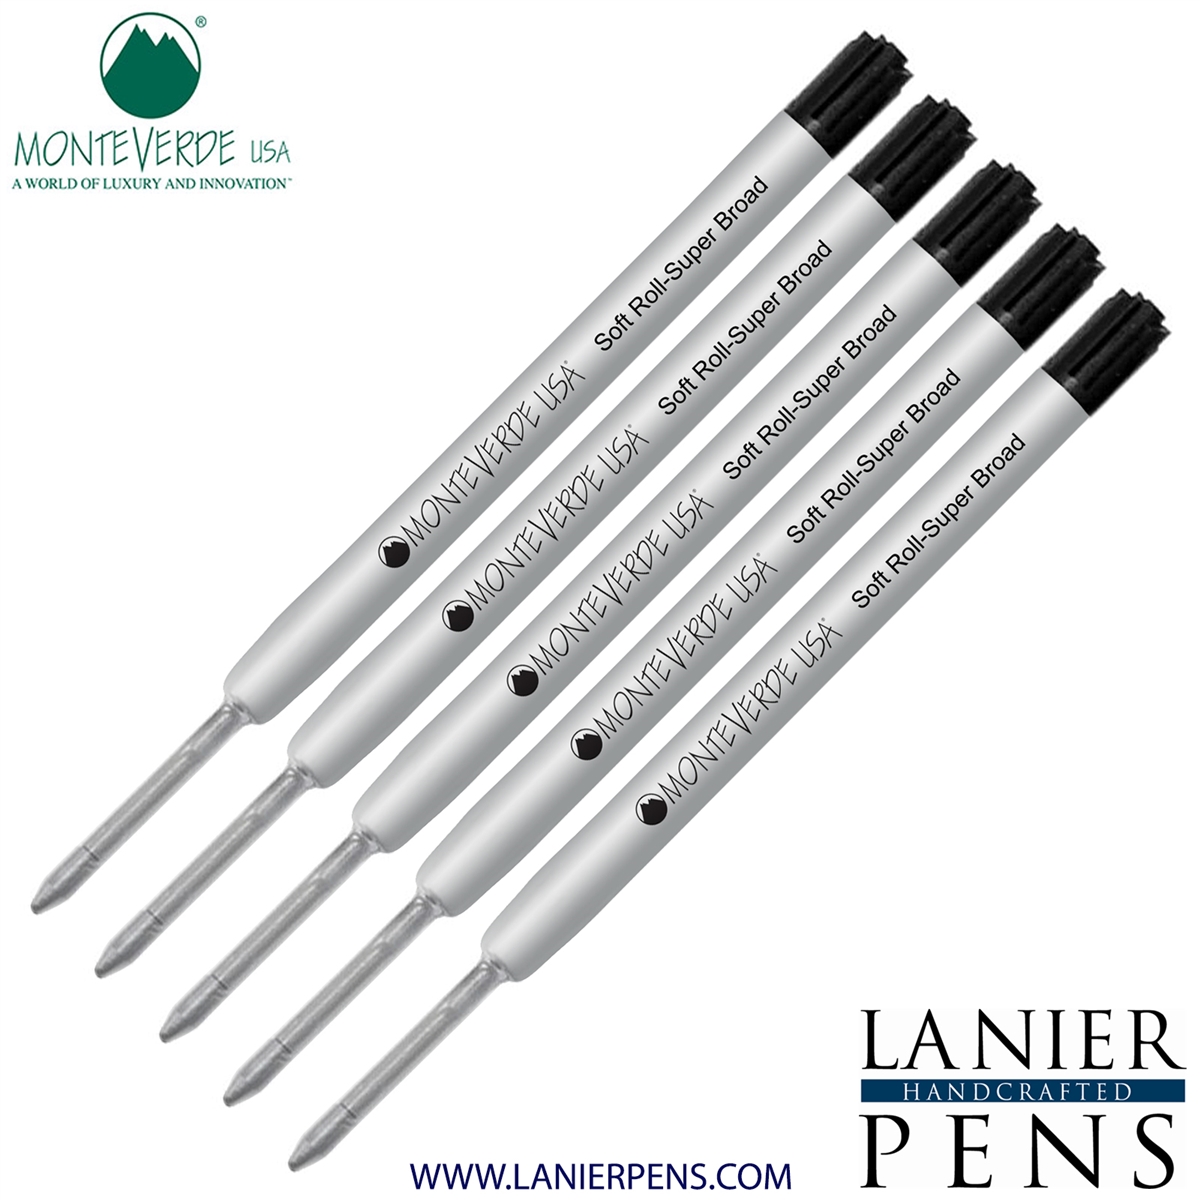 5 Pack - Monteverde Soft Roll Super Broad Ballpoint P15 Paste Ink Refill Compatible with most Parker Style Ballpoint Pens - Black (Super Broad Tip 1.4mm) - Lanier Pens